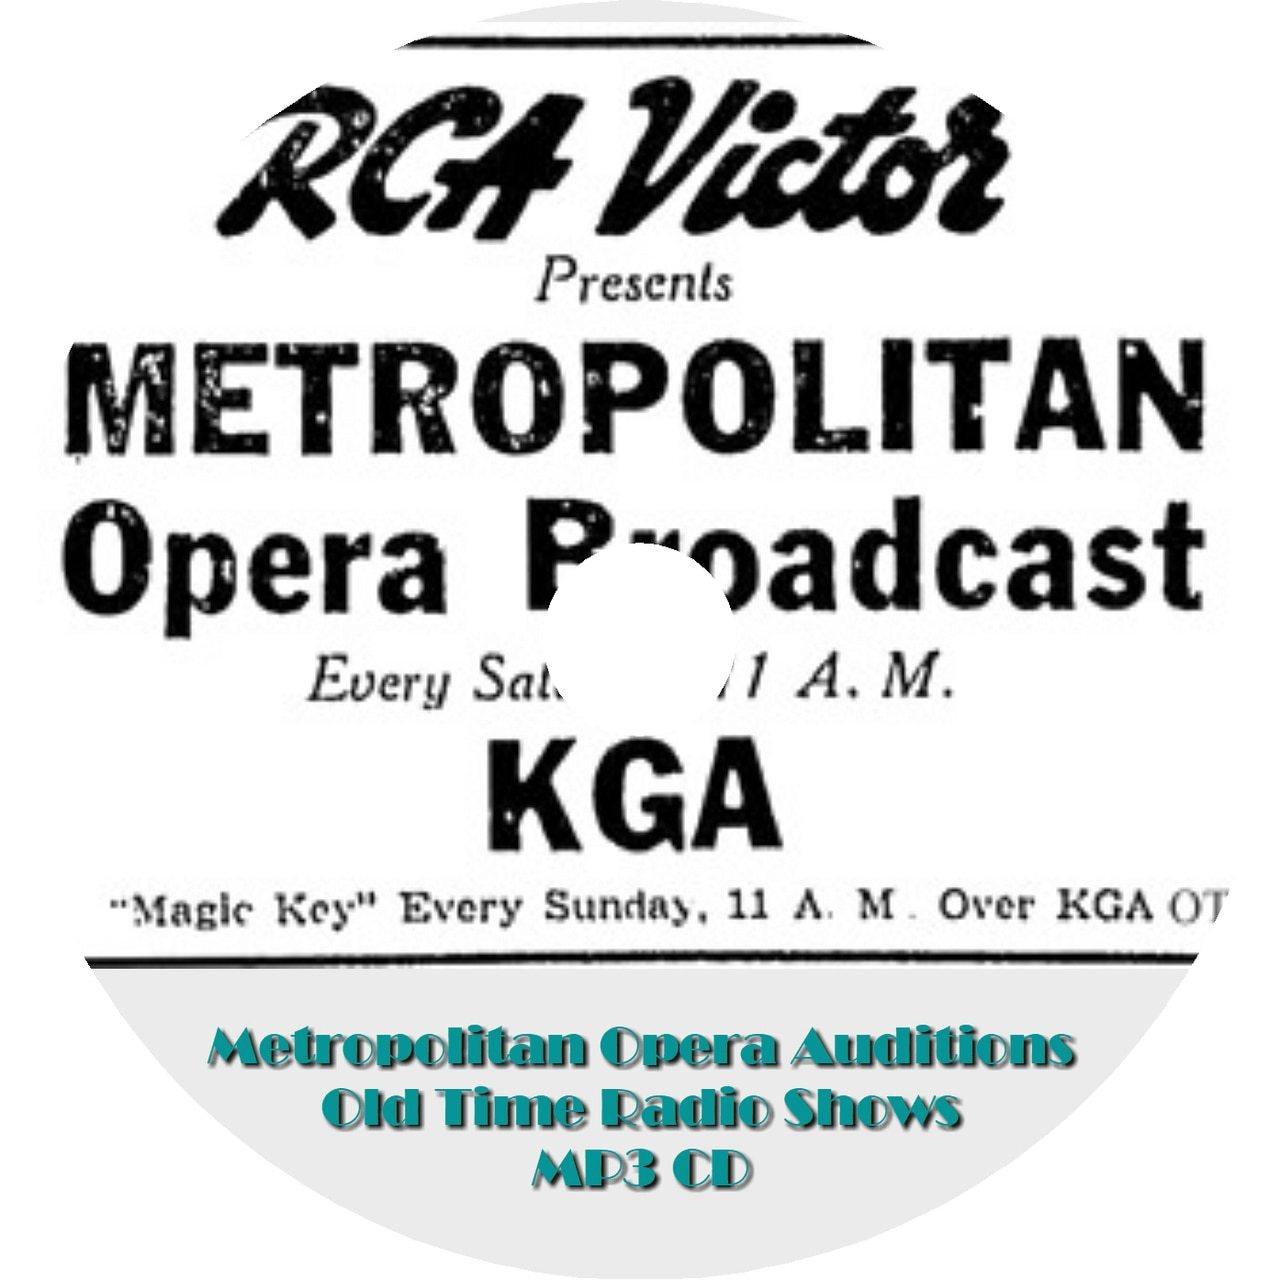 Metropolitan Opera Auditions Old Time Radio Shows 10 Episodes On MP3 CD - OTR World